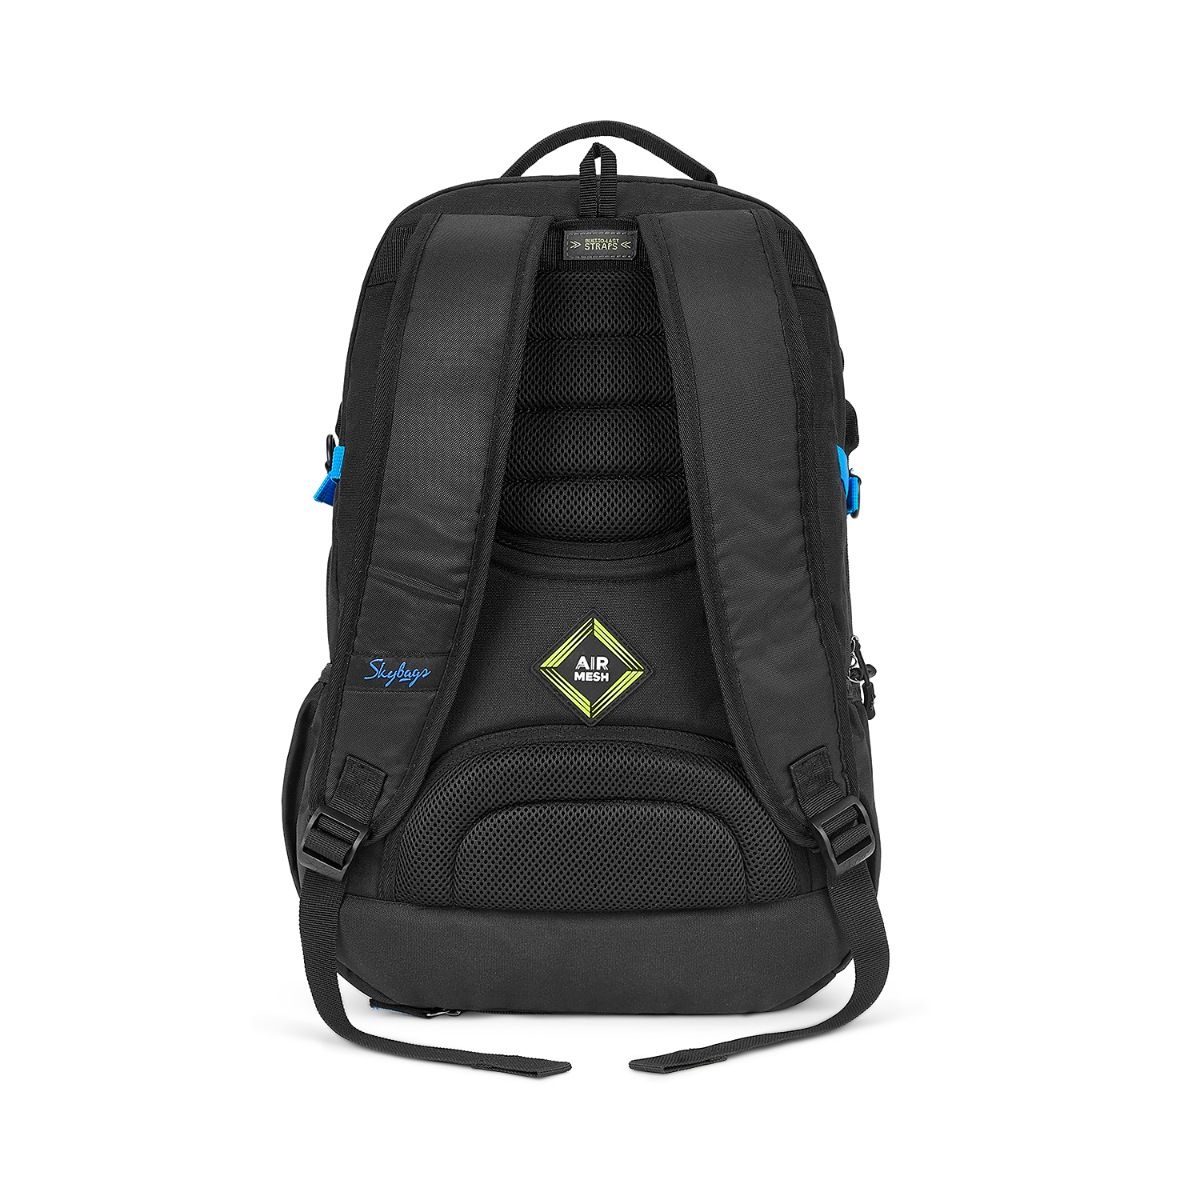 Skybags Strider Nxt 01 Laptop Backpack (H) Black: Buy Skybags Strider ...